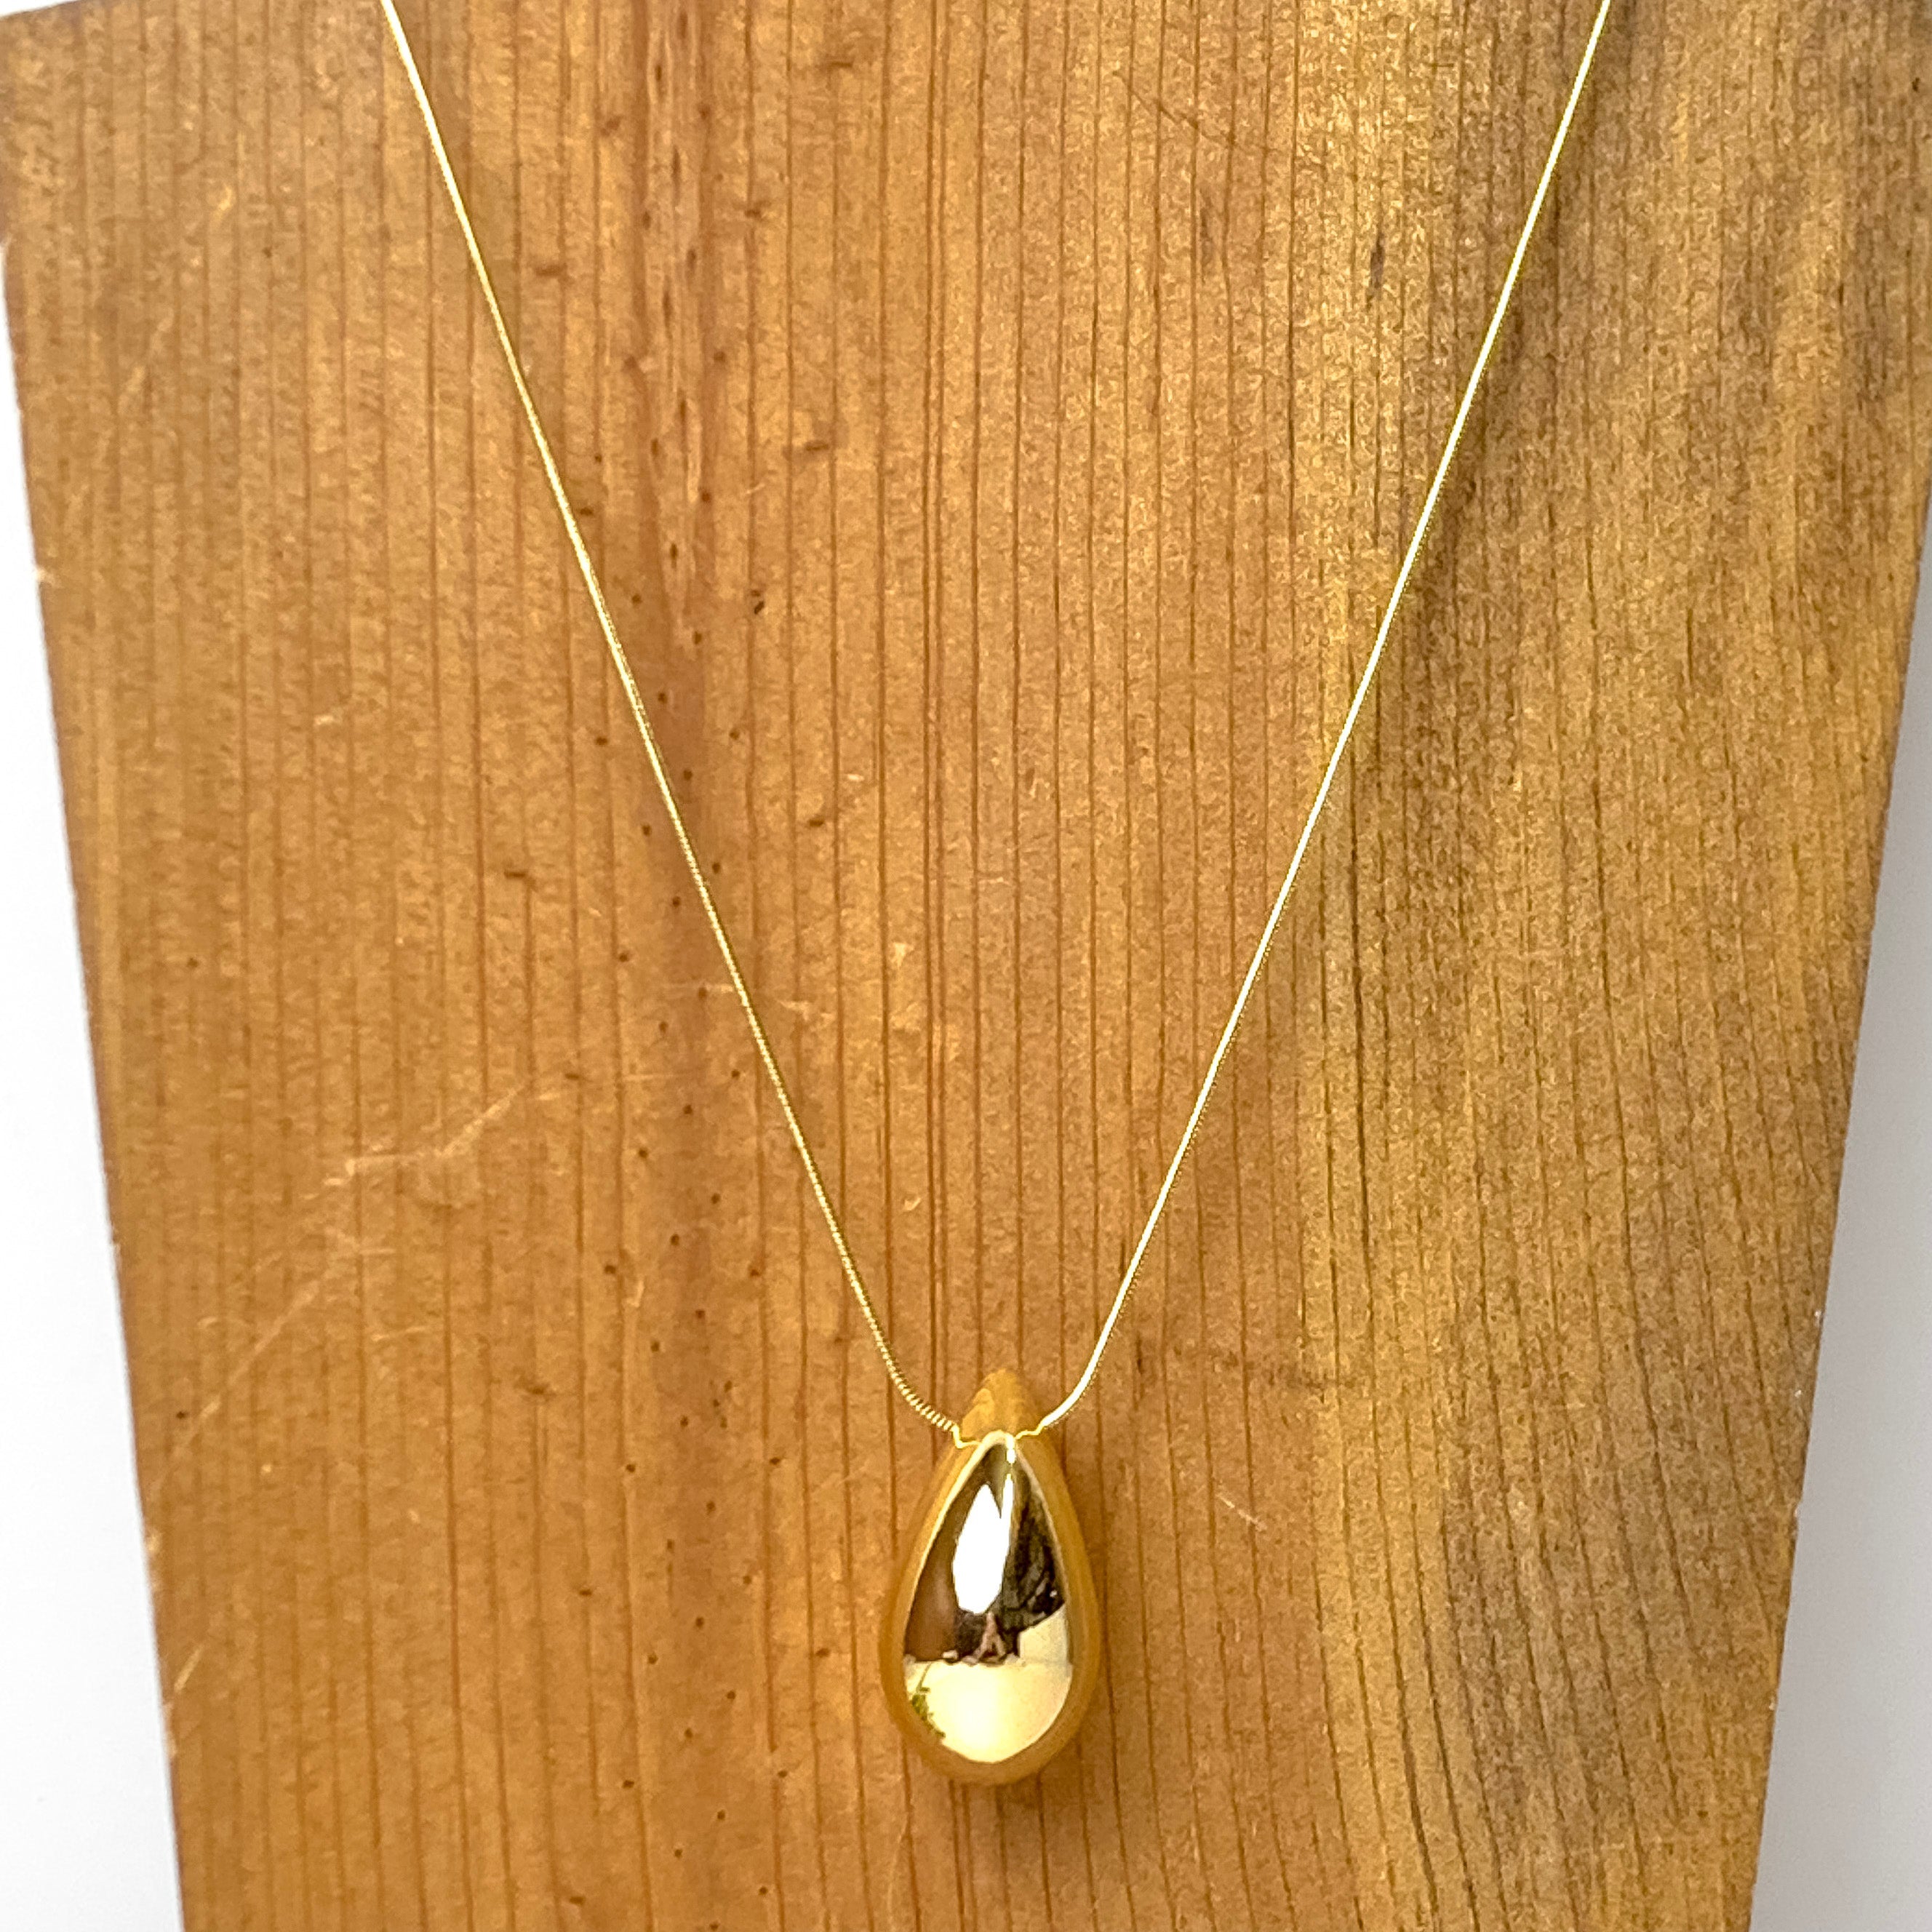 Posh By Pink Panache | Raindrop Pendant Necklace in Gold - Giddy Up Glamour Boutique